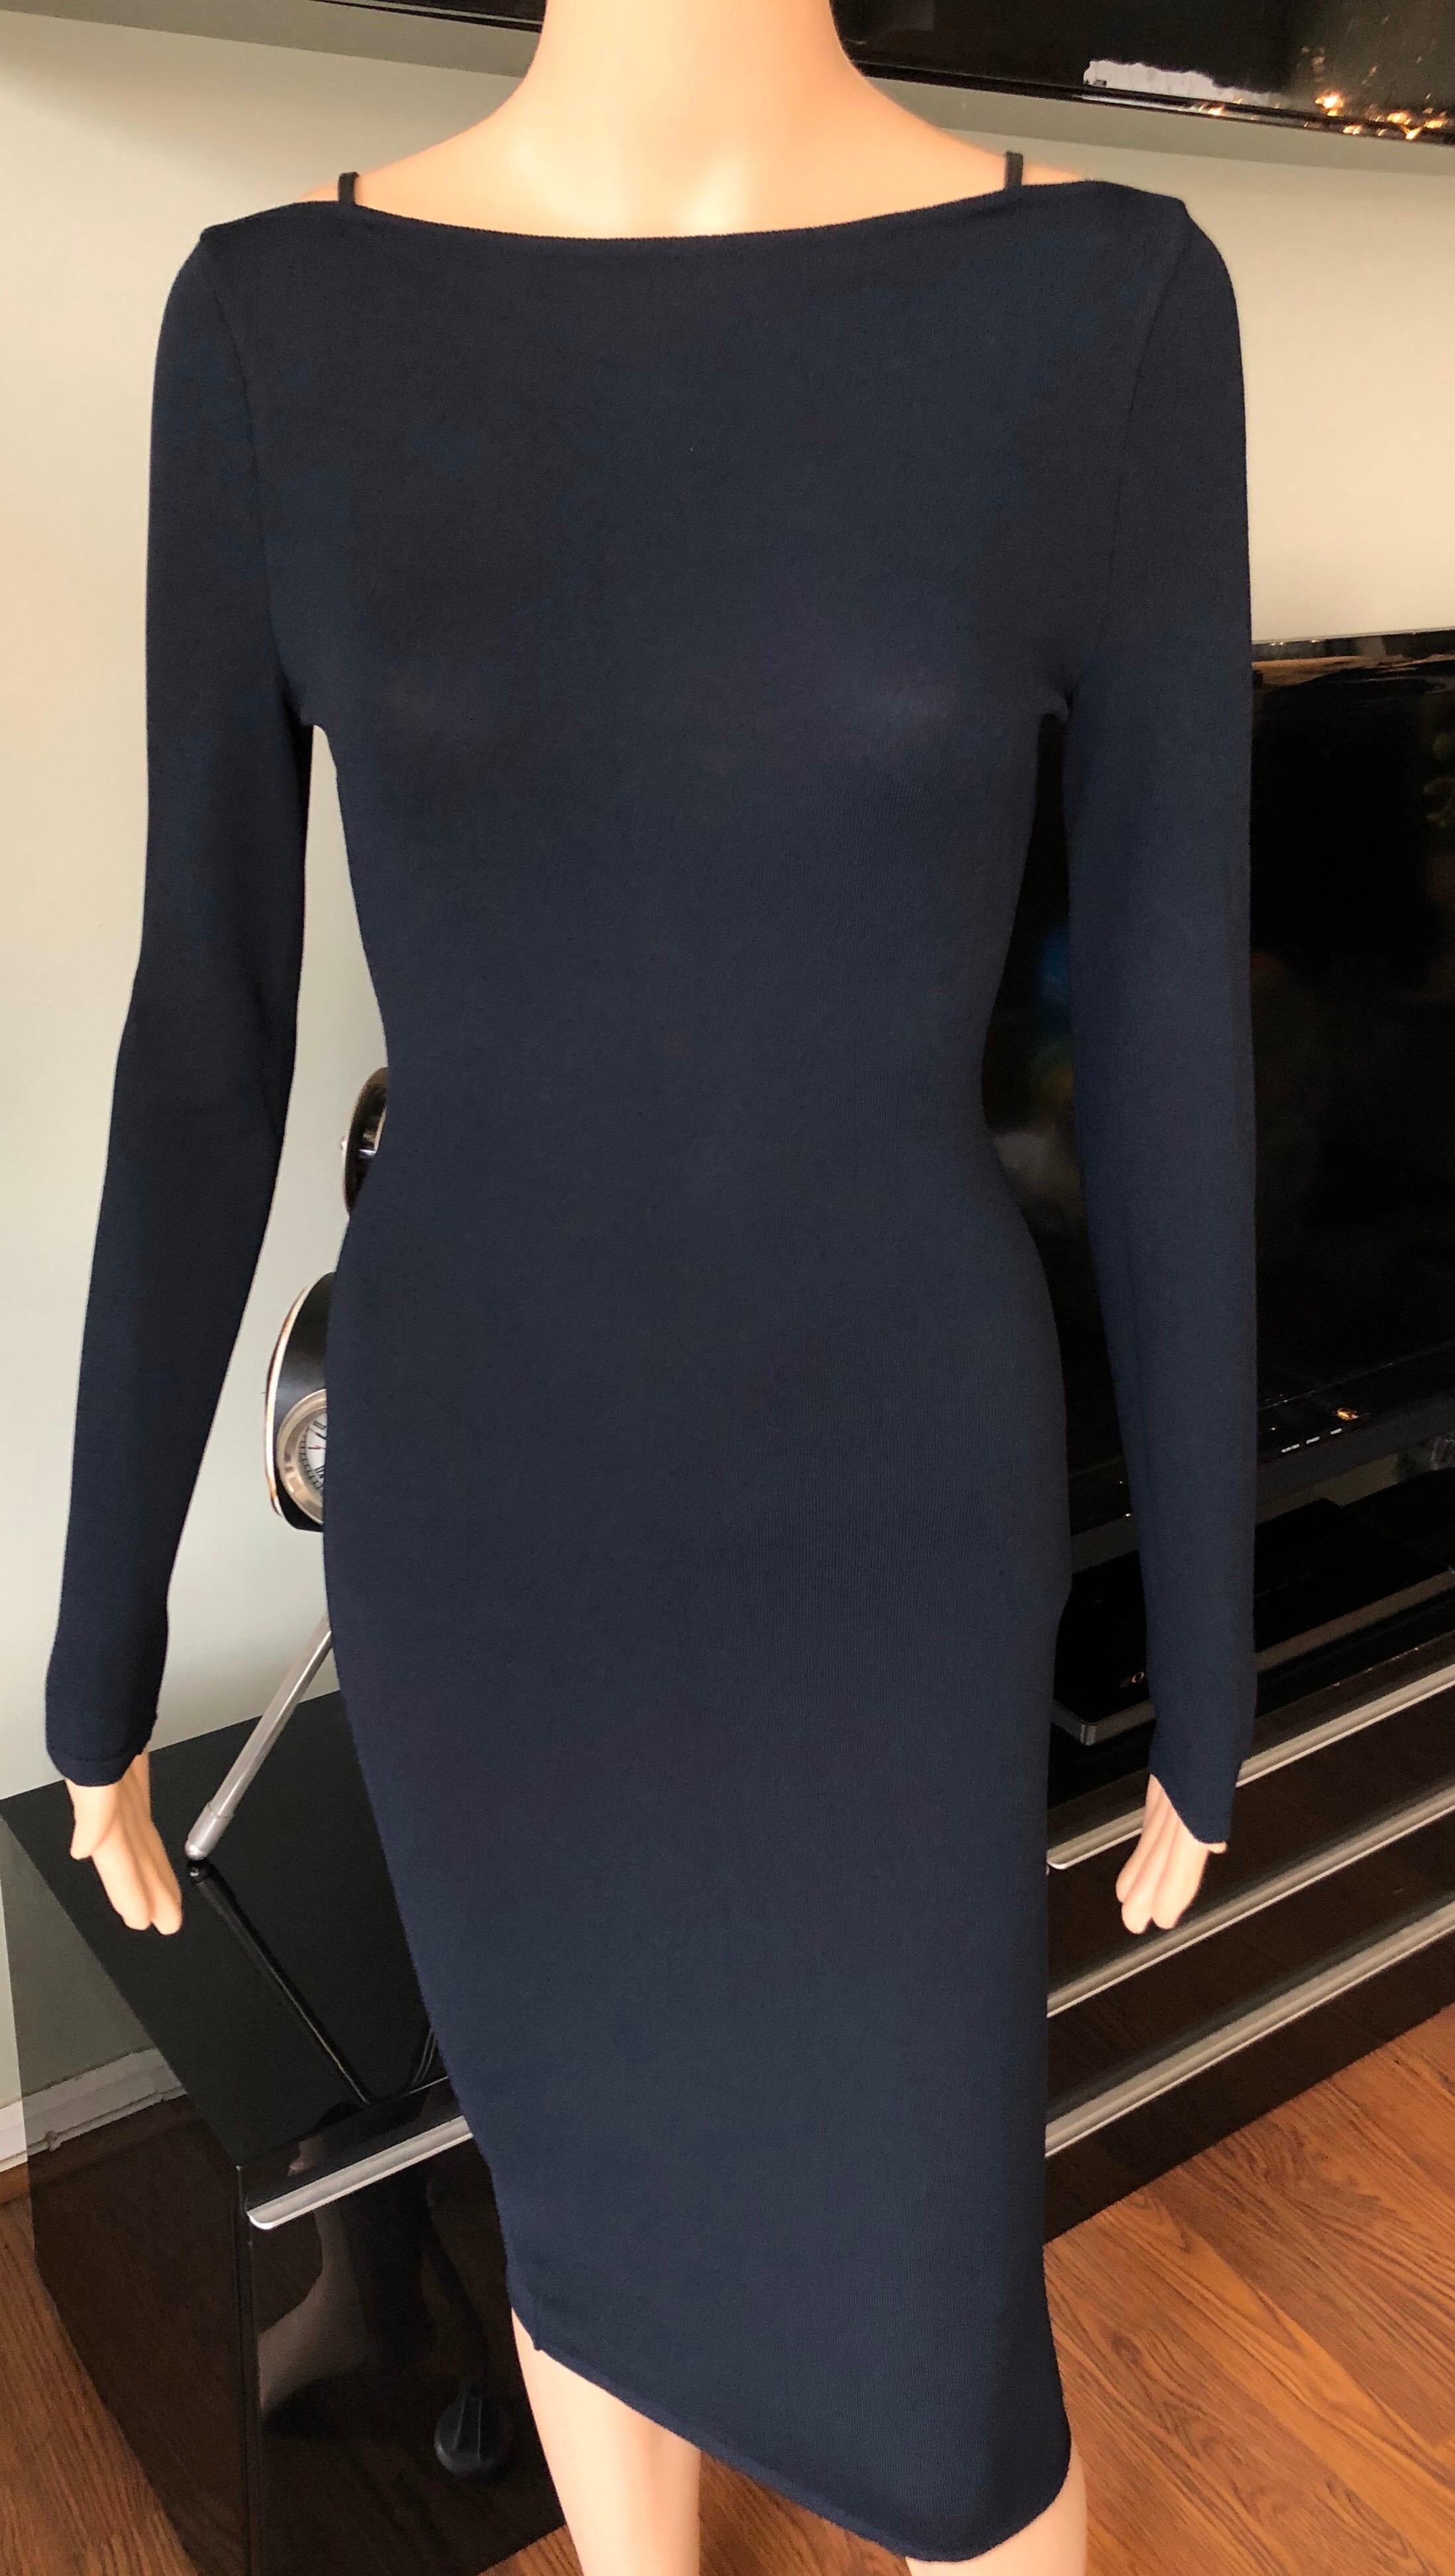 Tom Ford for Gucci S/S 1998 Vintage Bodycon Knit Midi Dress IT 38

Please note fabric tag has been removed- rayon & polyester. The dress has stretch.